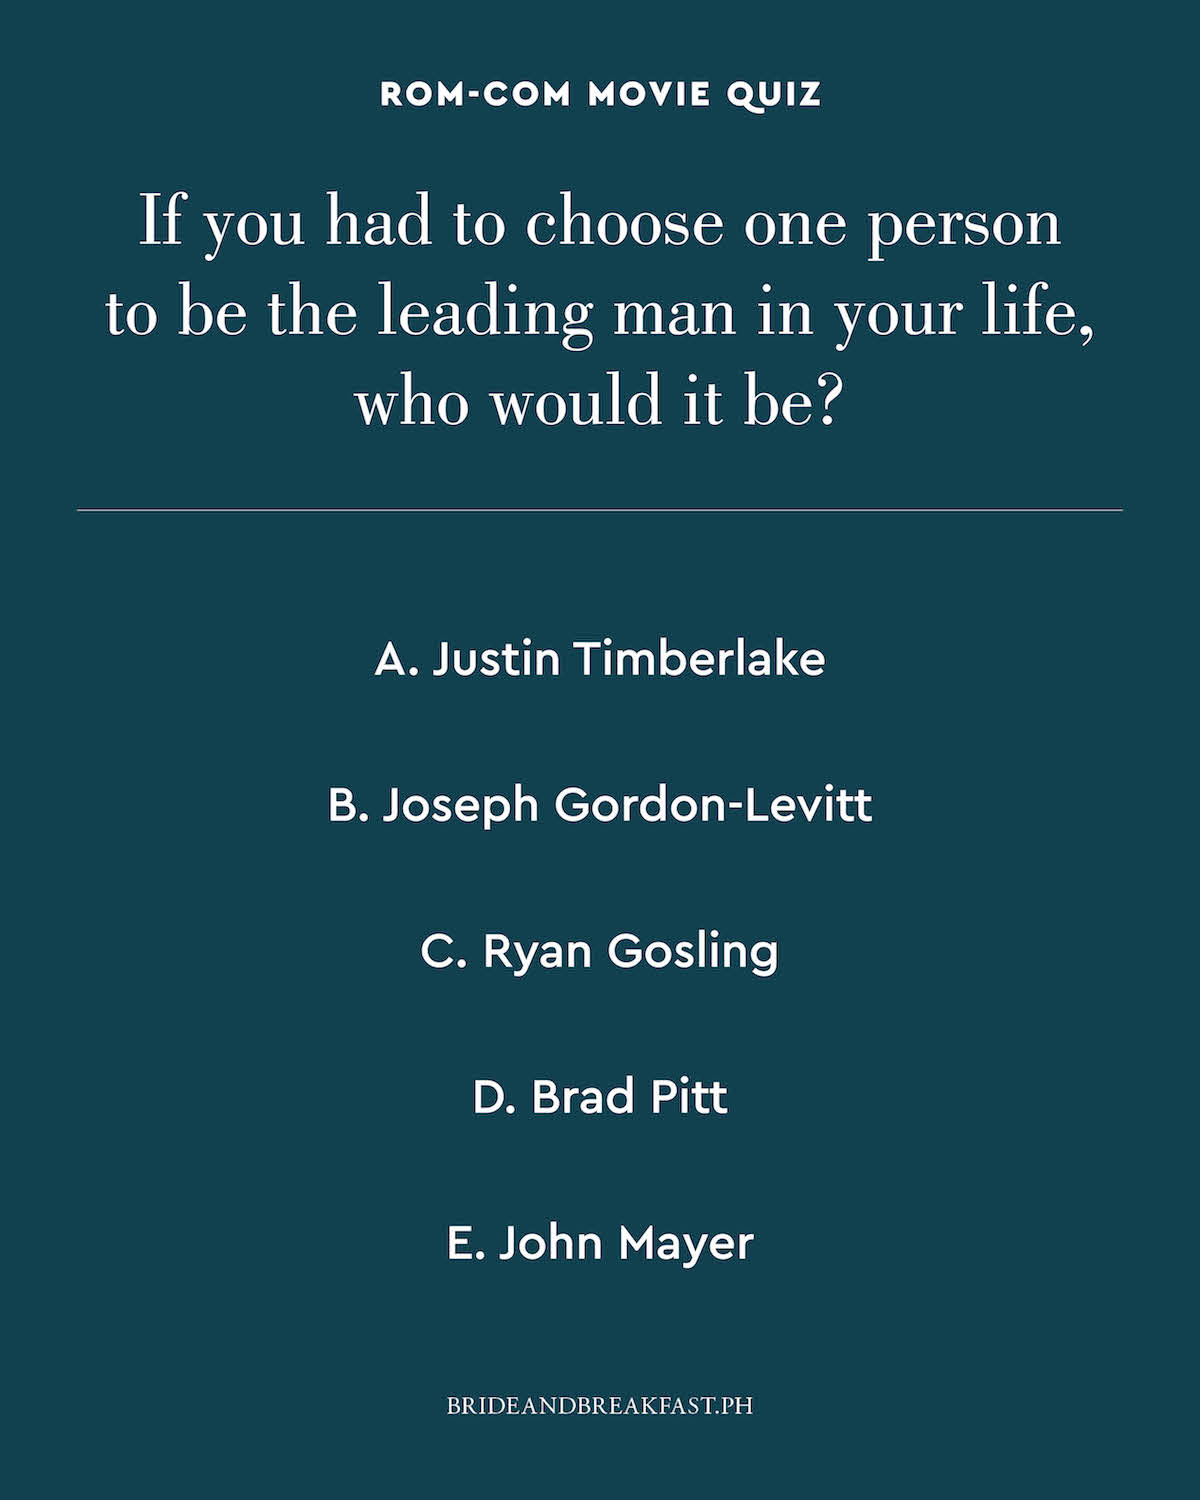 If you had to choose one person to be the leading man in your life, who would it be? A. Justin Timberlake B. Joseph Gordon-Levitt C. Ryan Gosling D. Brad Pitt E. John Mayer